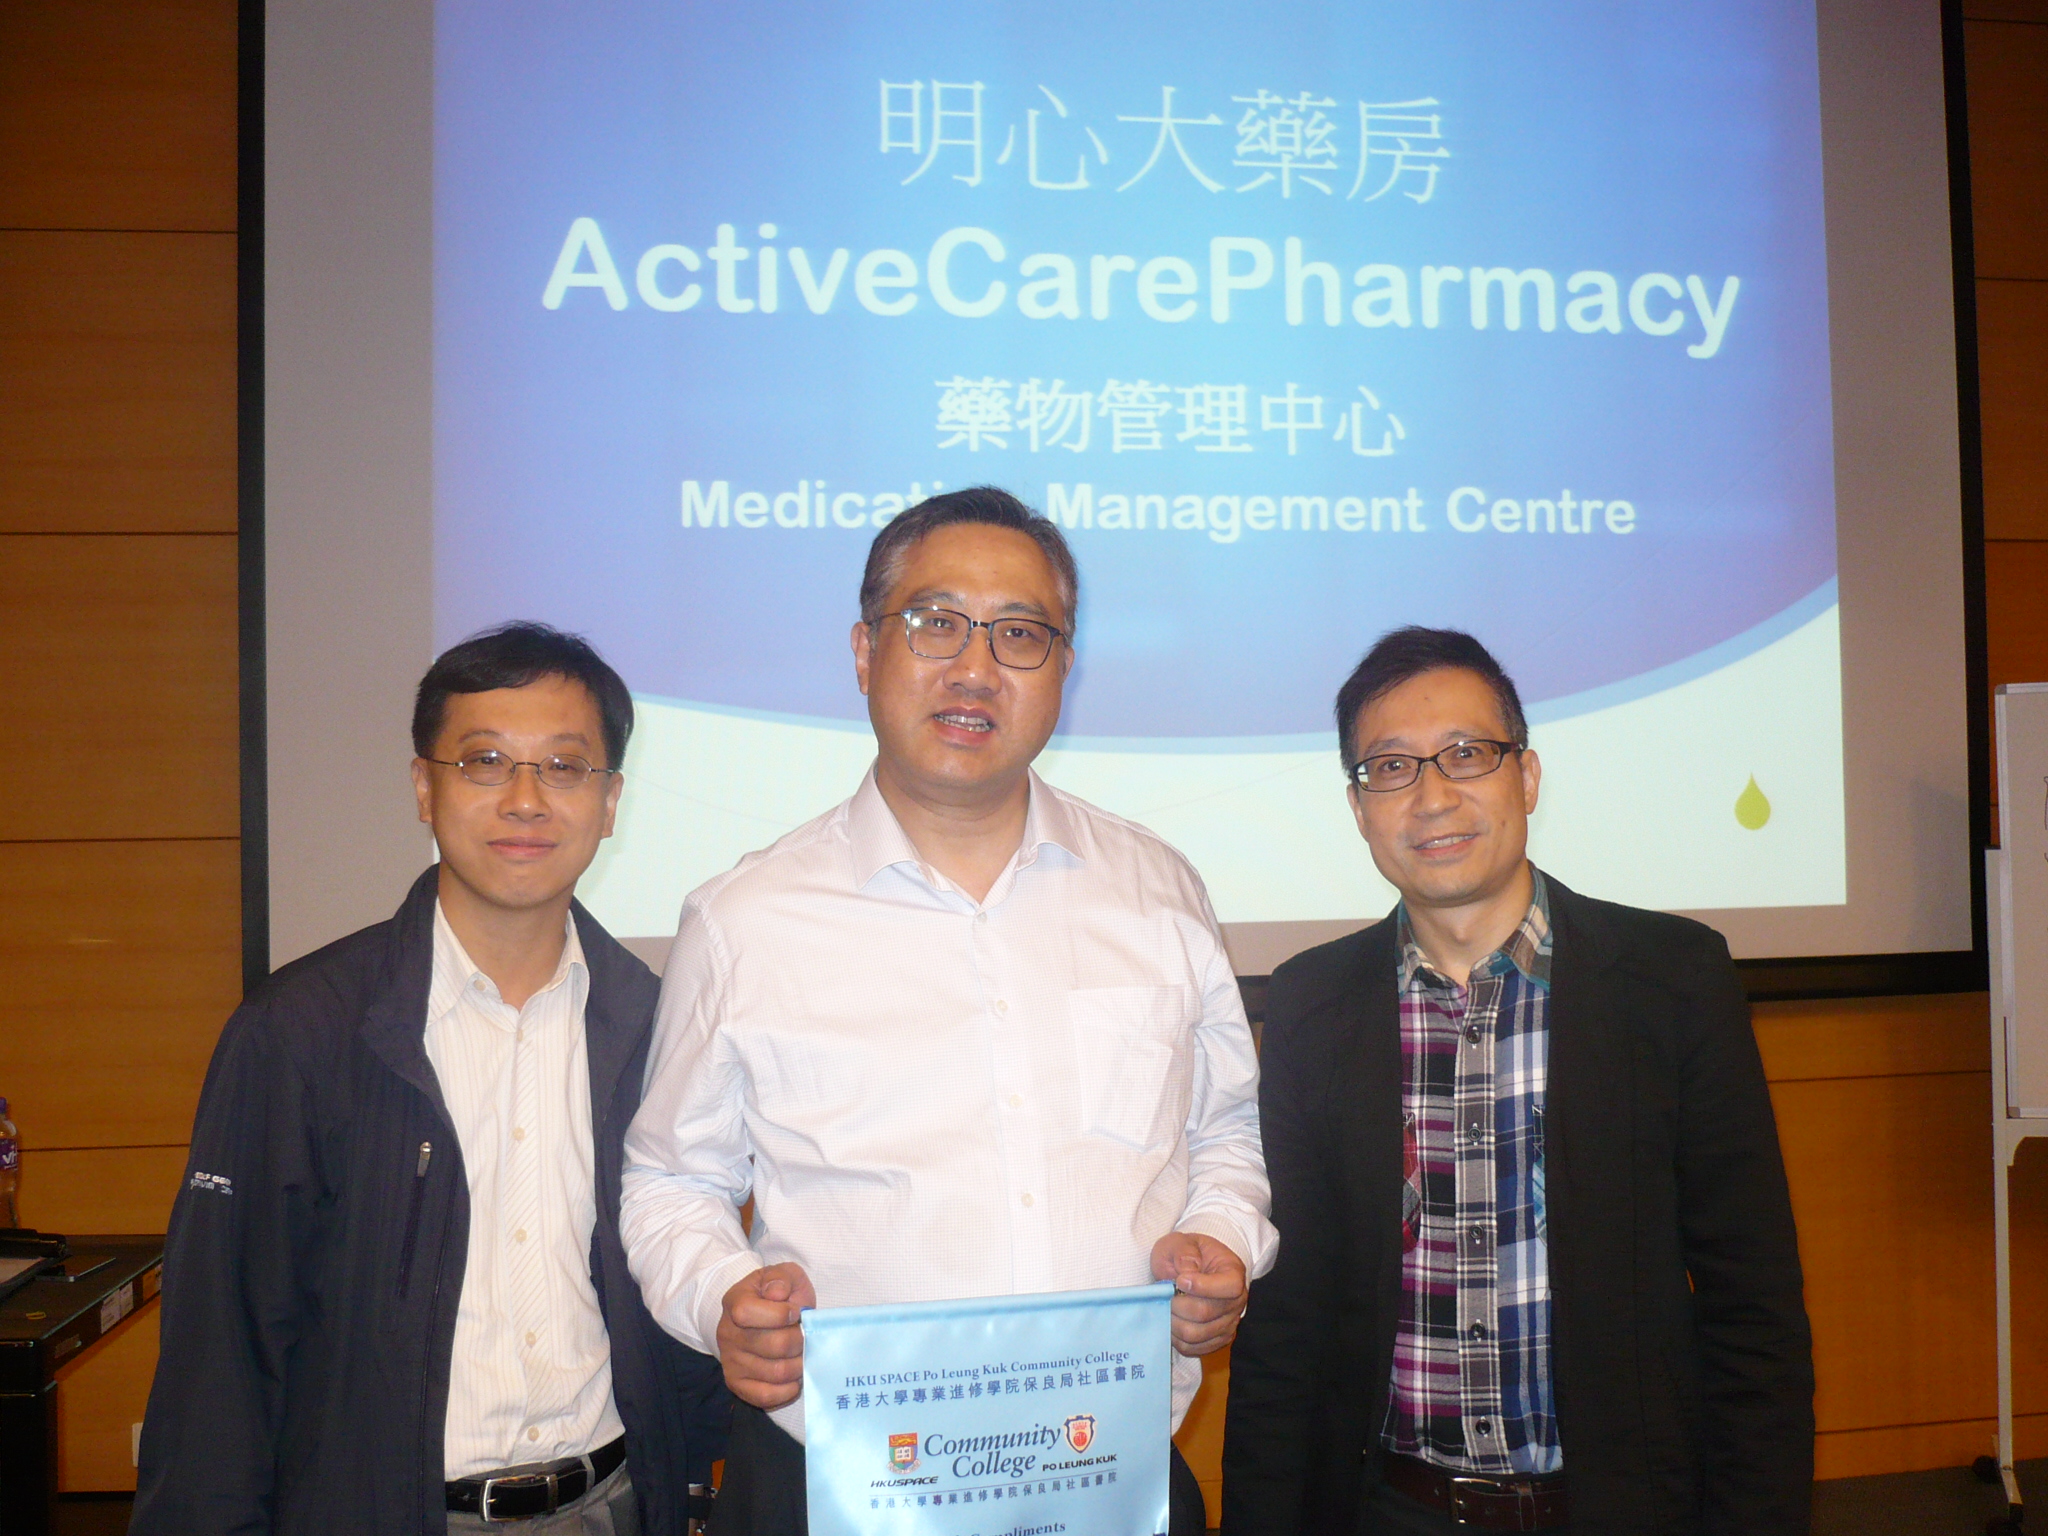 Briefing Session for the 2014 Summer Work Experience Programme in ActiveCare Group cum Academic Seminar "Medication Management for the Elderly" - Photo - 21